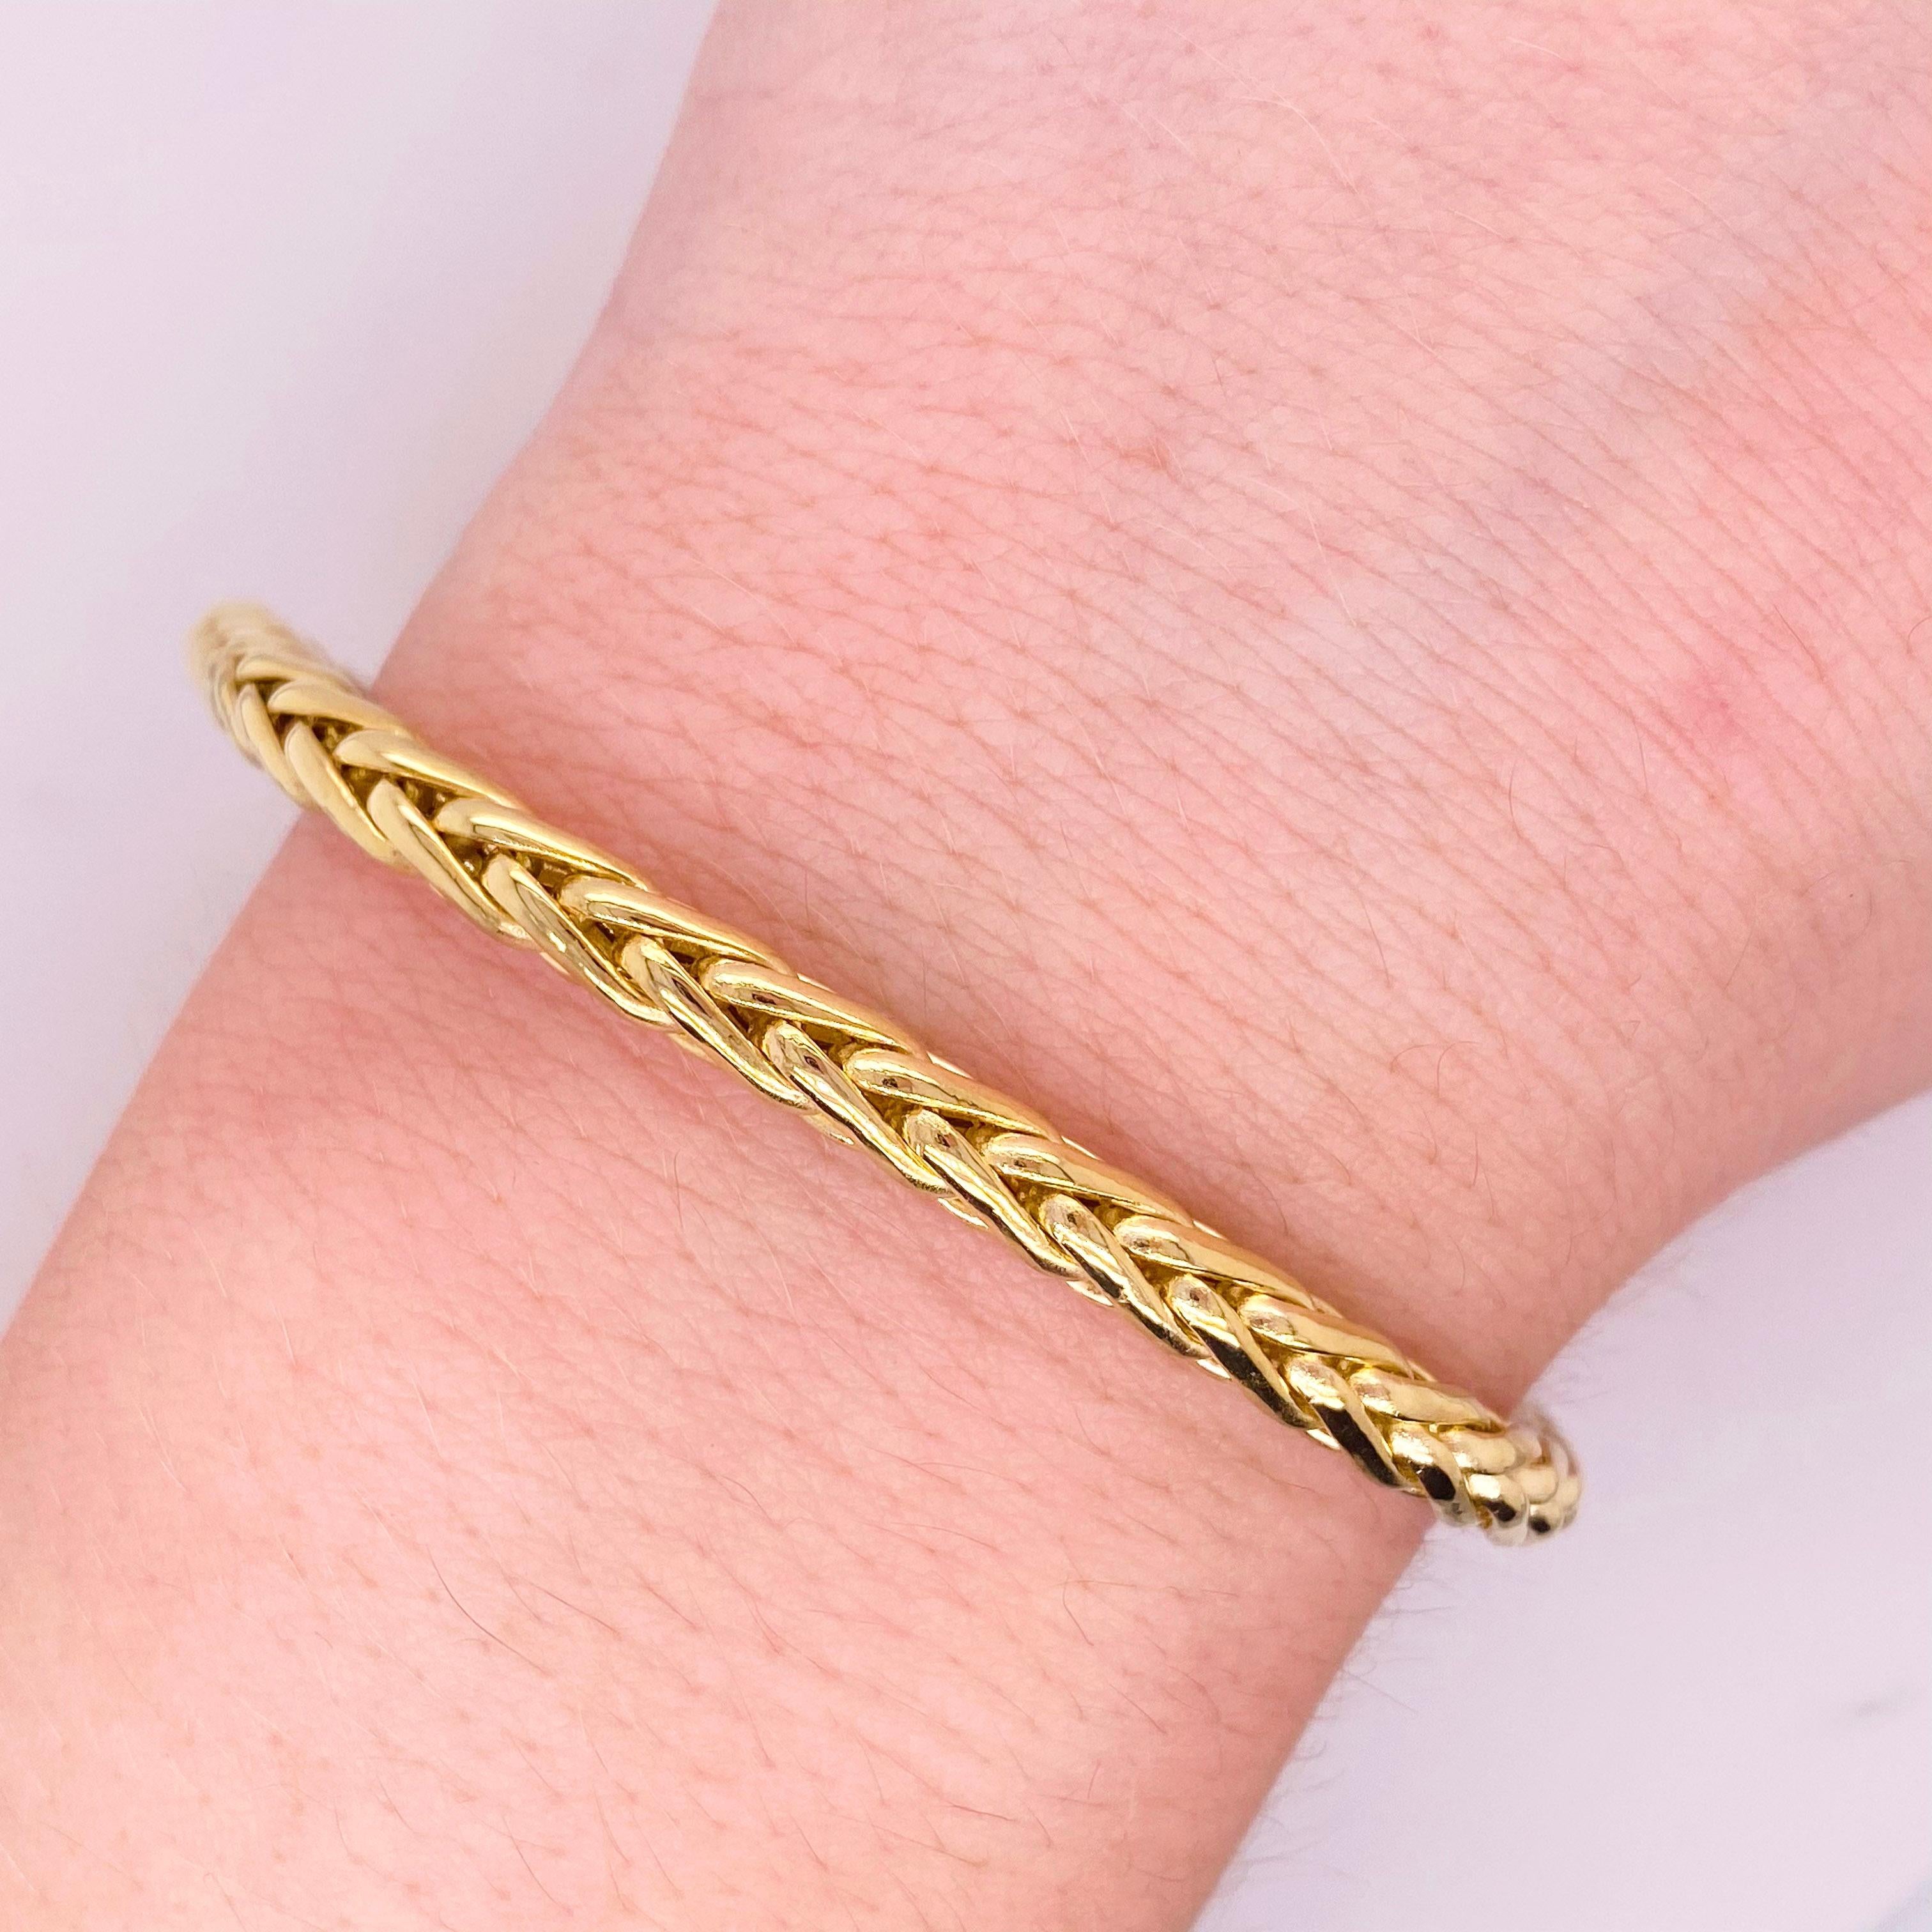 This wheat chain is heavy and strong for any wrist!  Can be shortened for a woman!
Metal Quality: 14K Yellow Gold
Clasp: Large Lobster Clasp
Width: 4.47 Millimeter
Length: 8 inches 
Weight: 9 Grams 